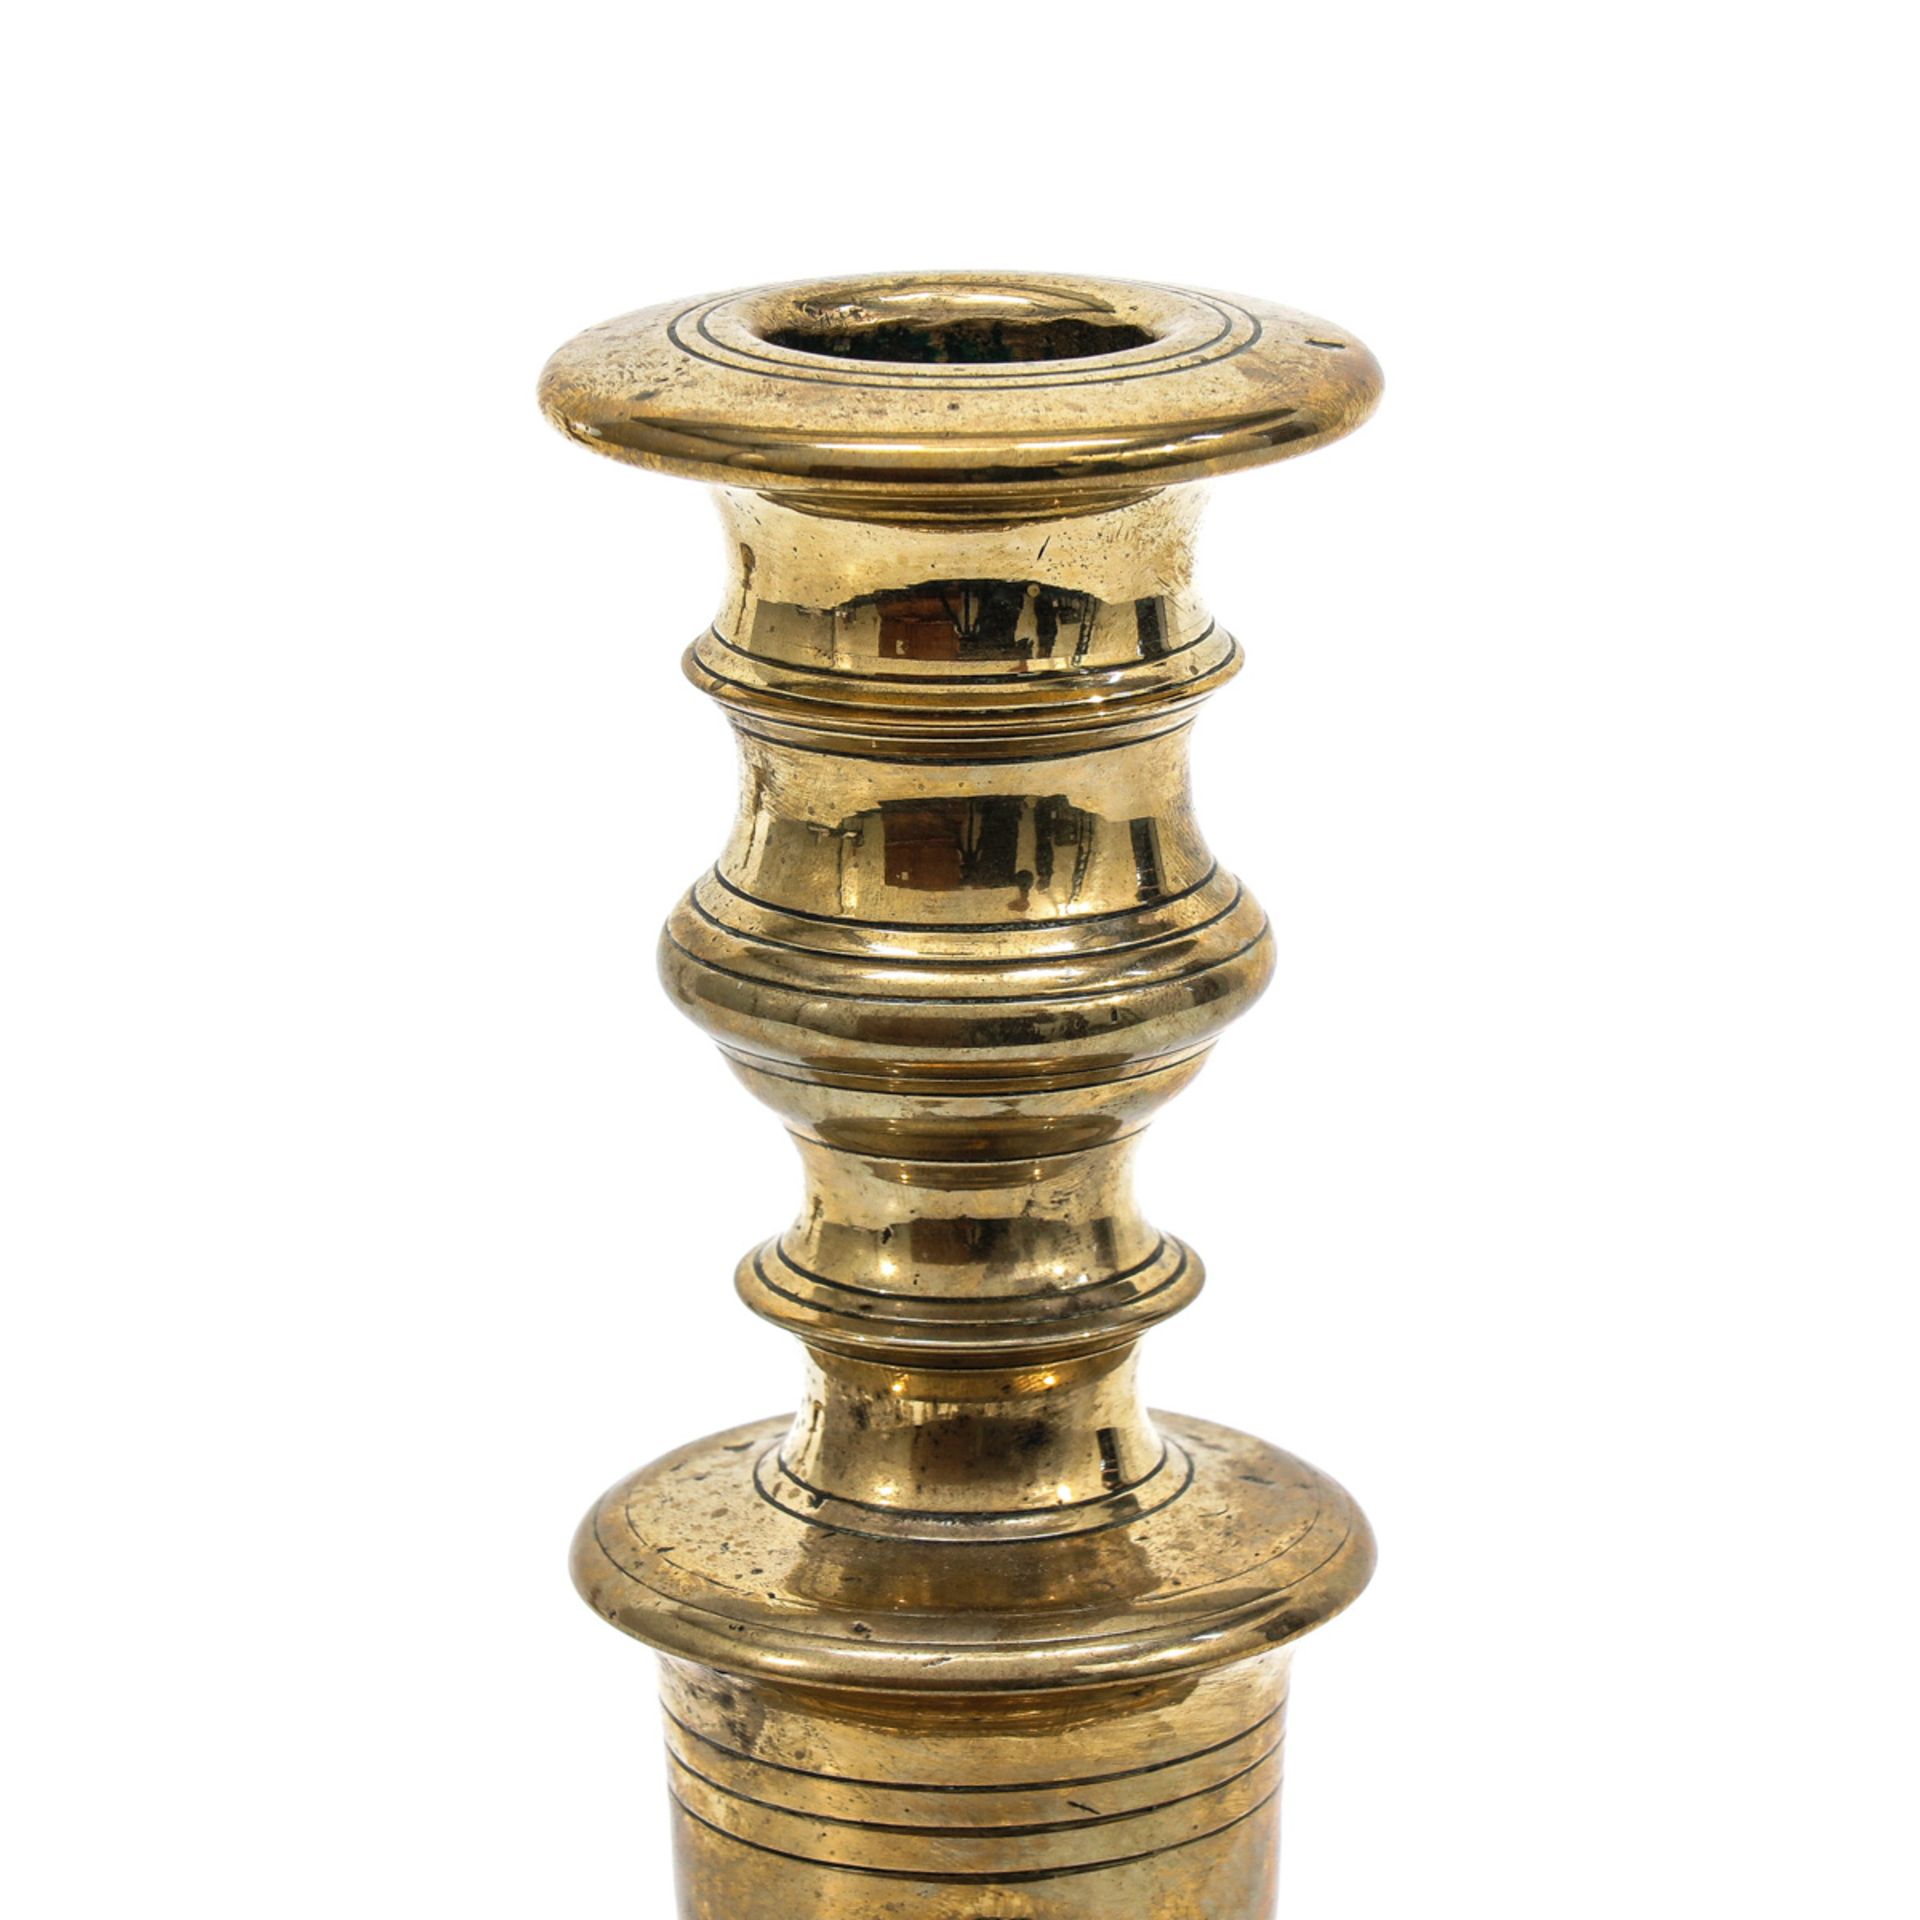 A Pair of Candlesticks - Image 9 of 9